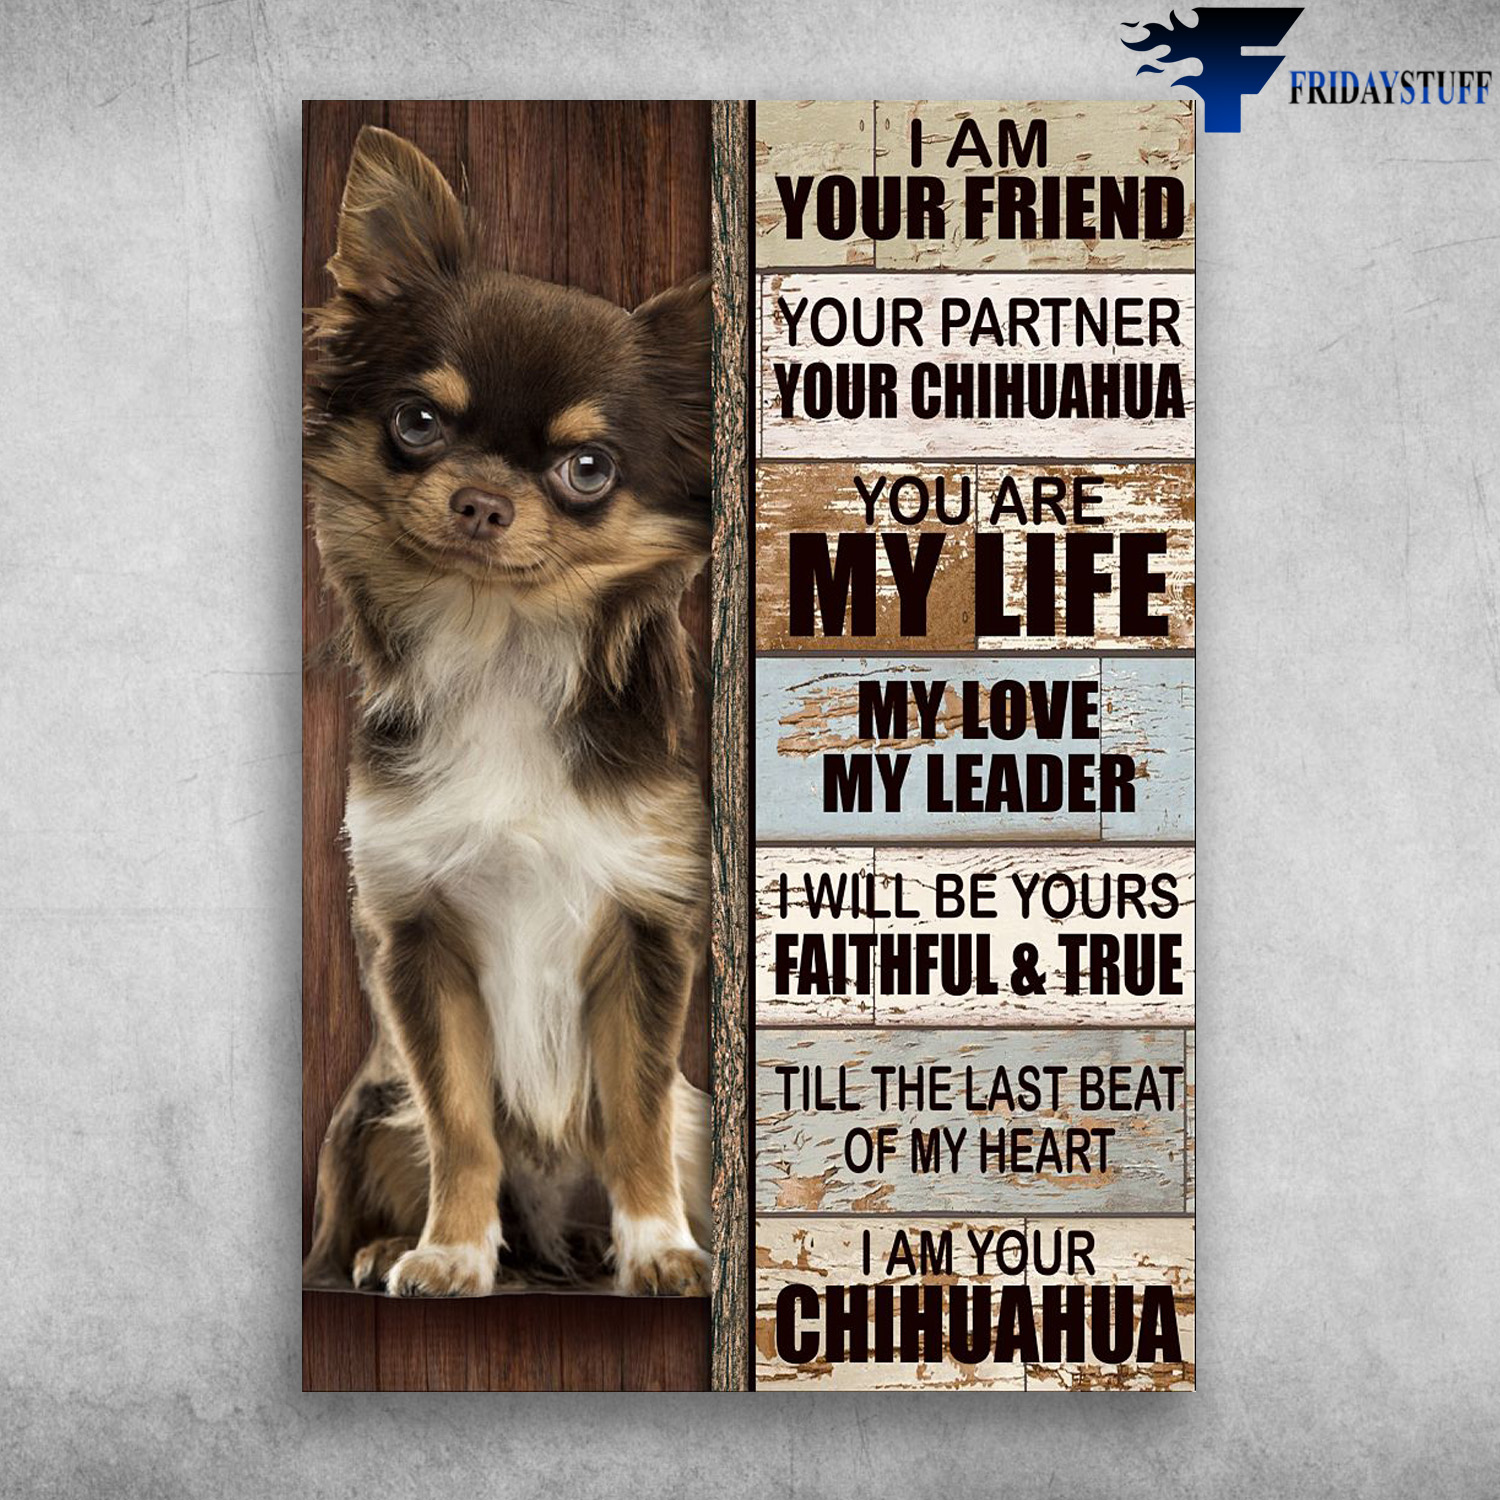 Chihiahia Dog - I Am Your Friend, Your Partner, Your Chihuahua, You Are My Life, My Love, My Leader, I Will Be Yours, Faithful And True, Till The Last Beat Of My Heart, I Am Your Chihuahua